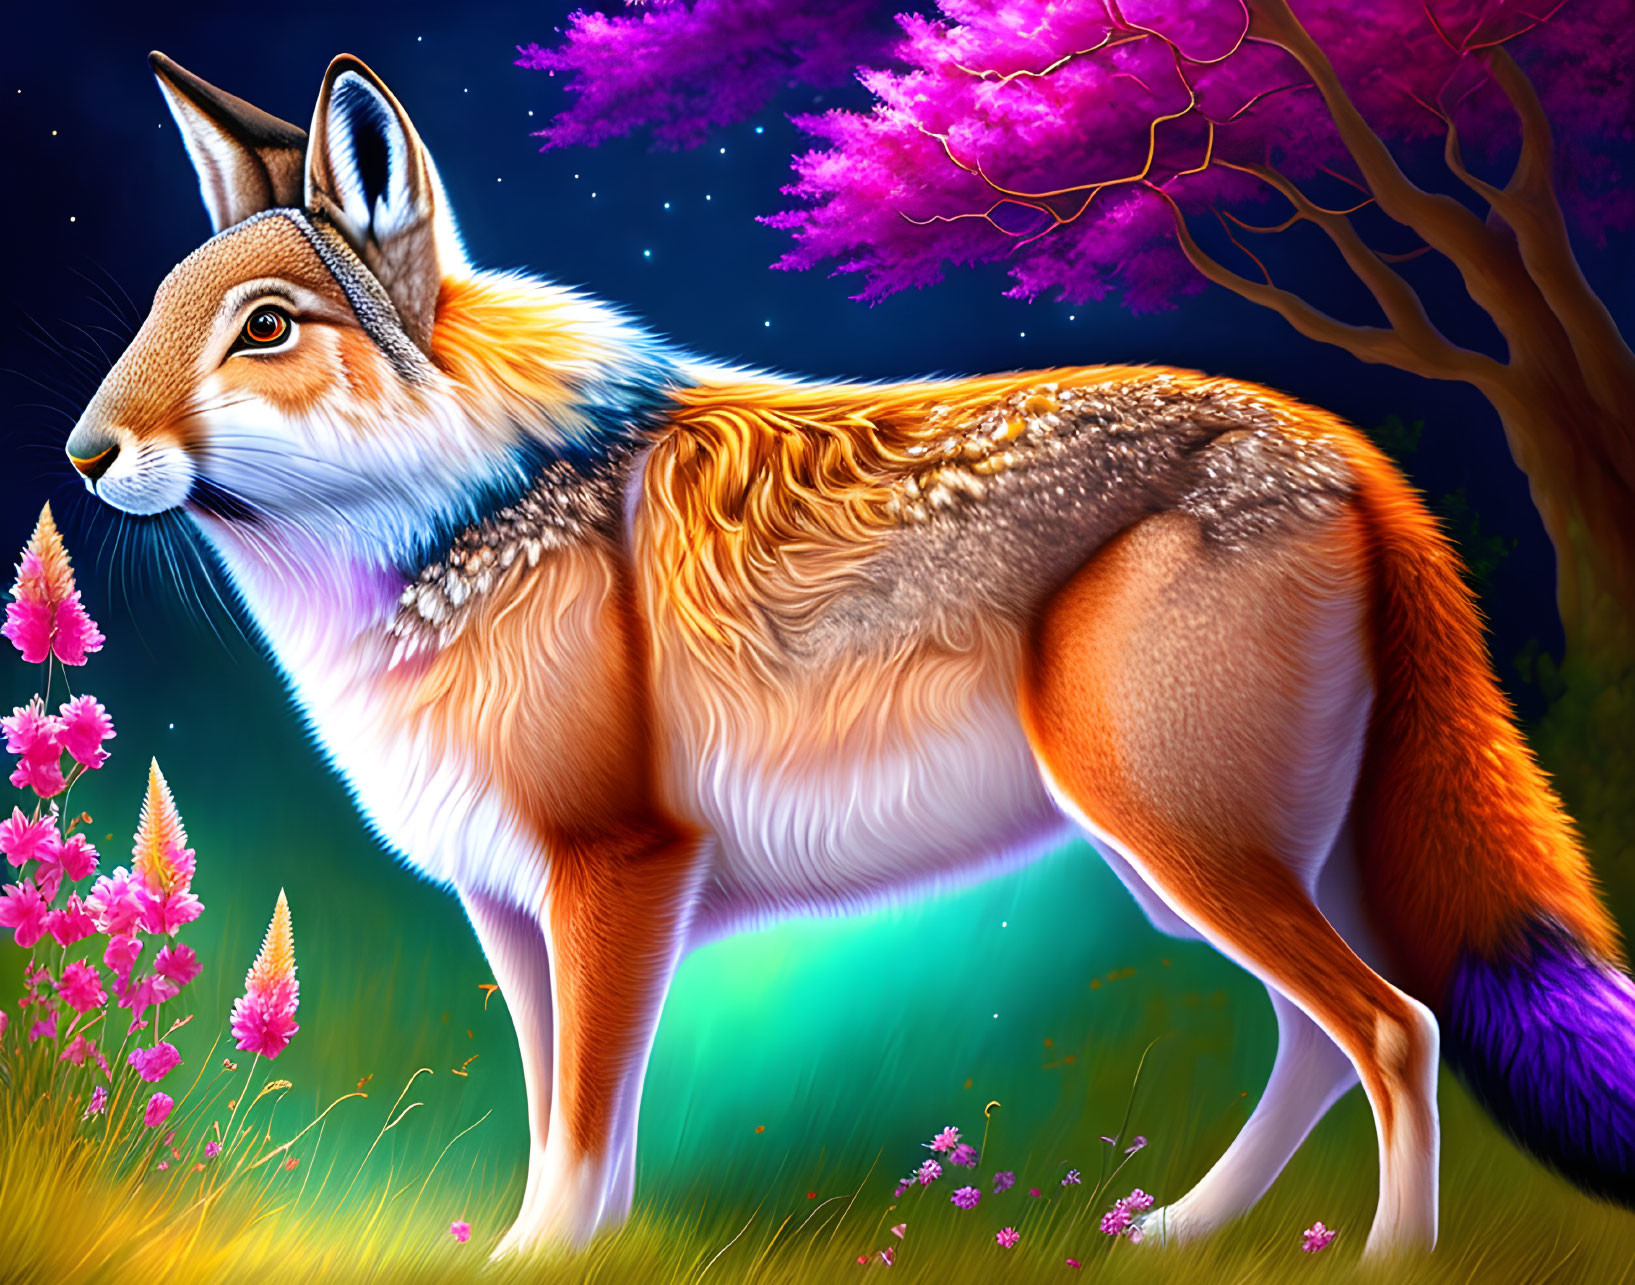 Colorful Artwork: Fox-Body Creature in Glowing Forest